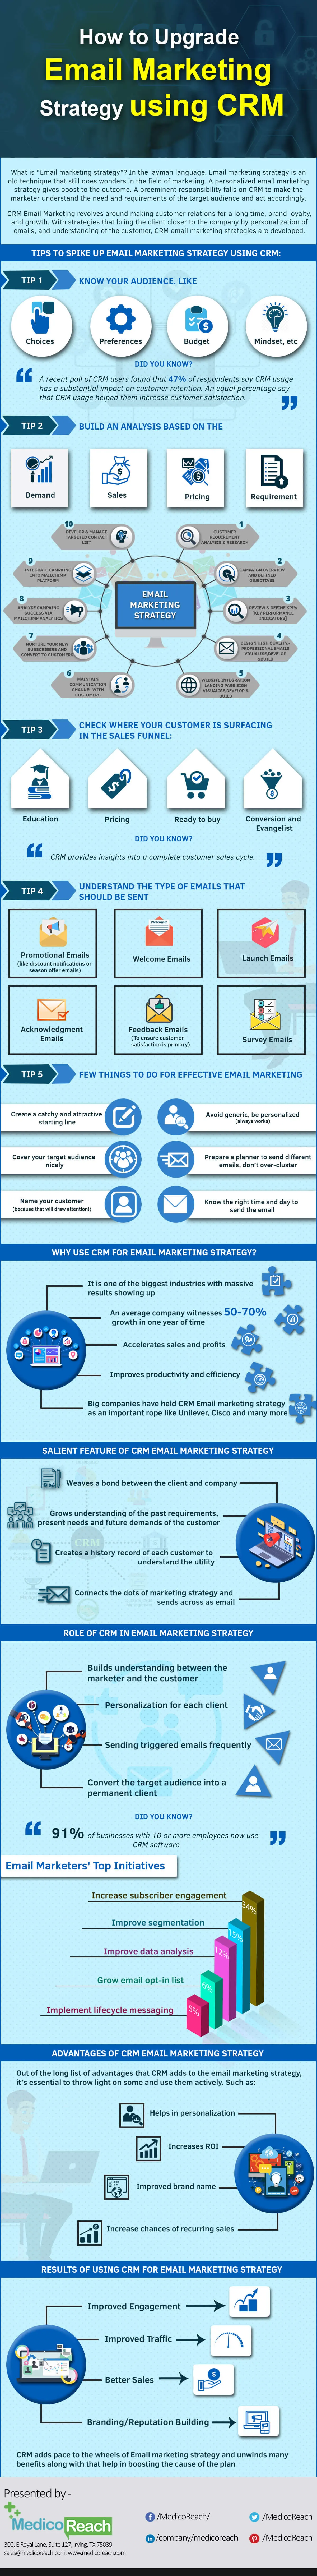 Email Marketing Strategy using CRM - MR